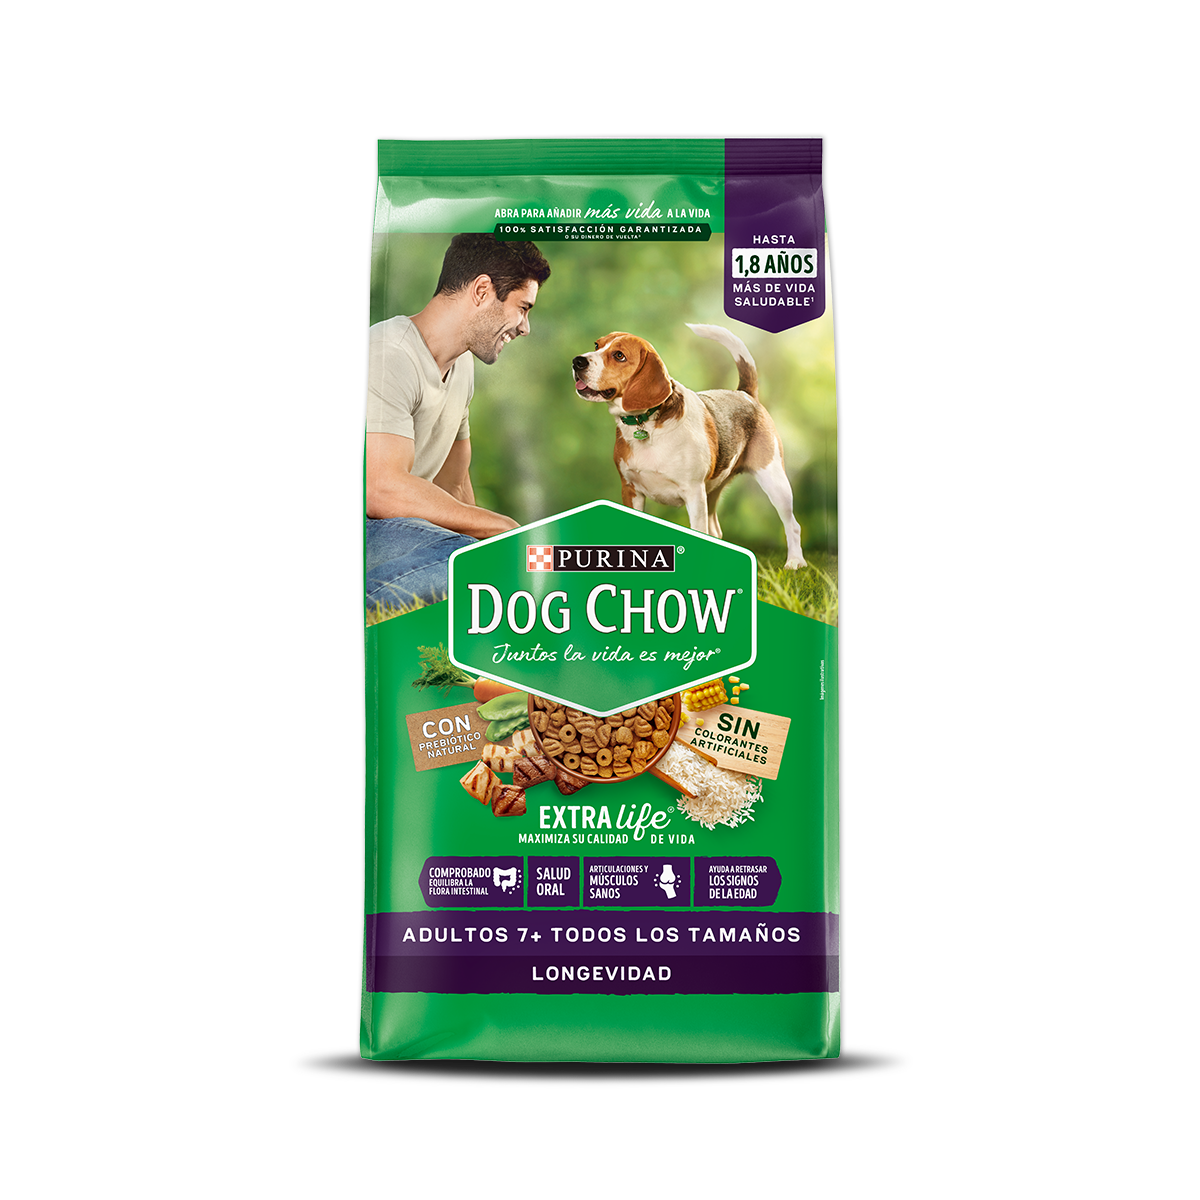 Purina-DogChow-adultos7%2Bcolombia.png